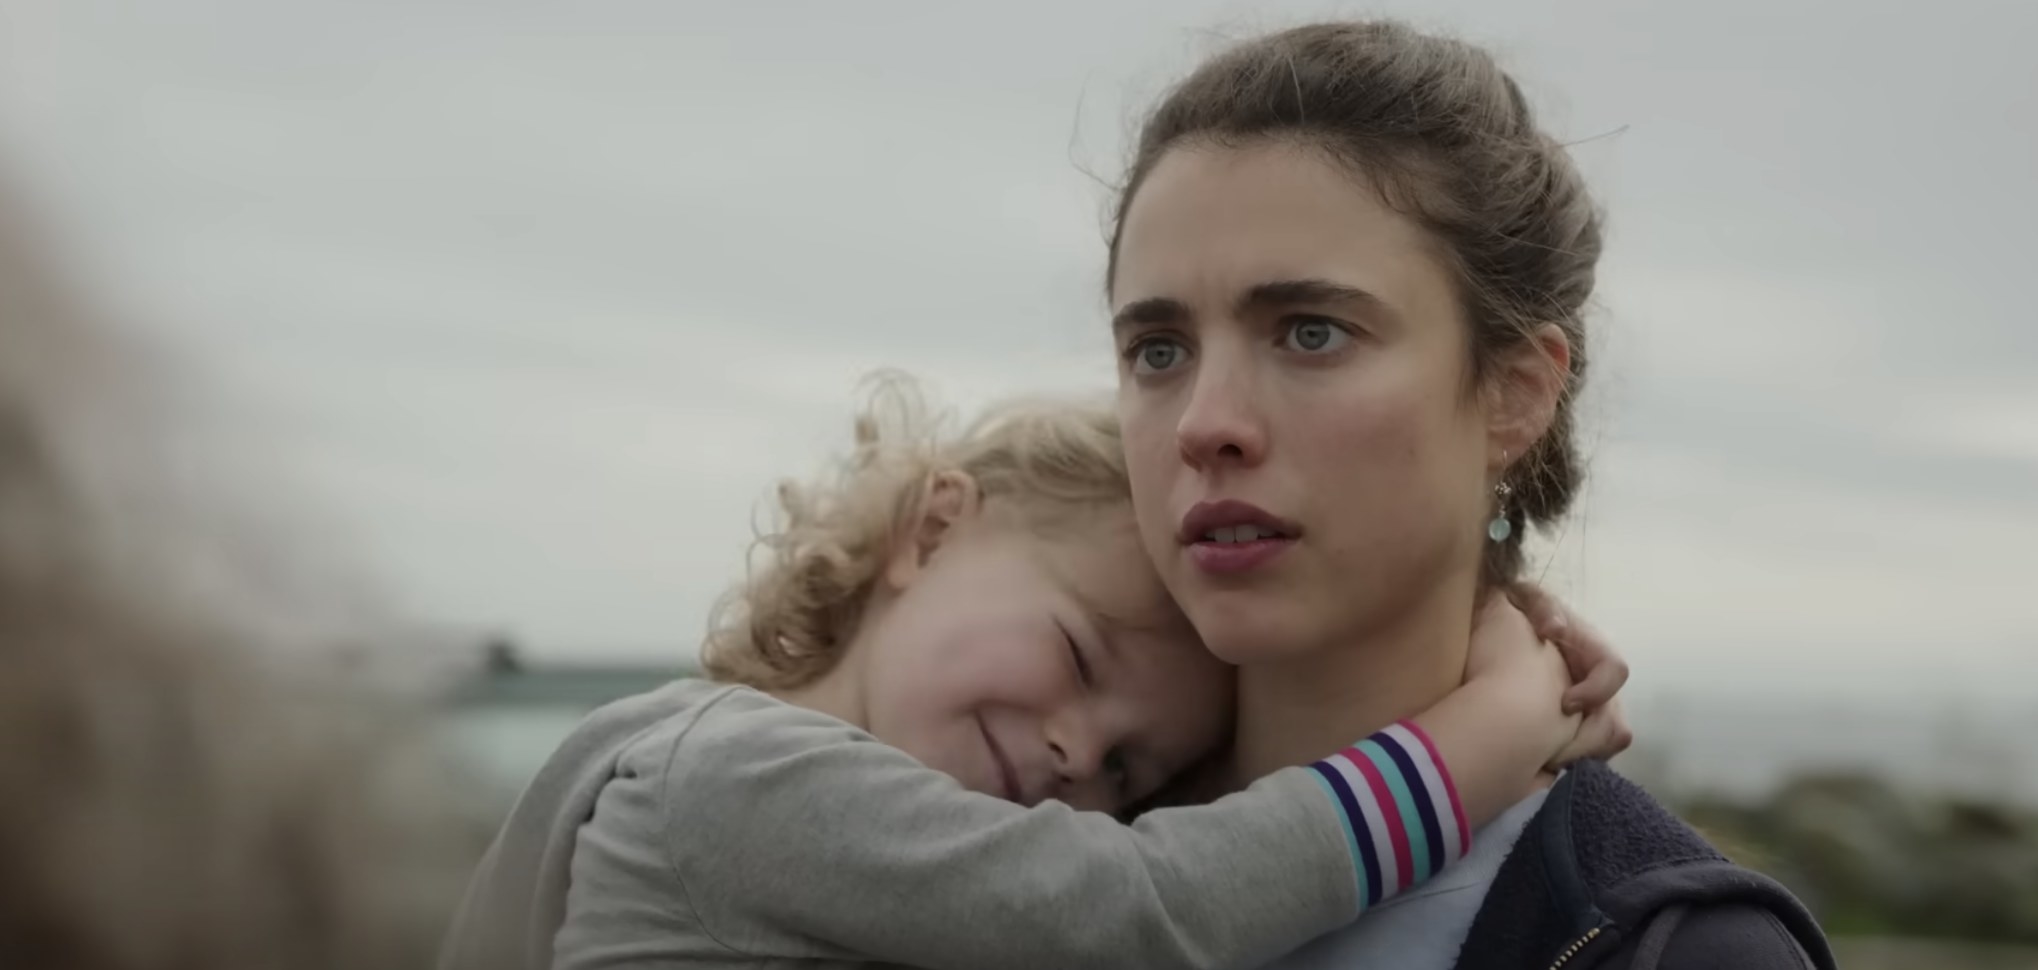 In the Netflix series, Maid, actor Margaret Qualley stares intently while the actor portraying her daughter clings tightly to her neck